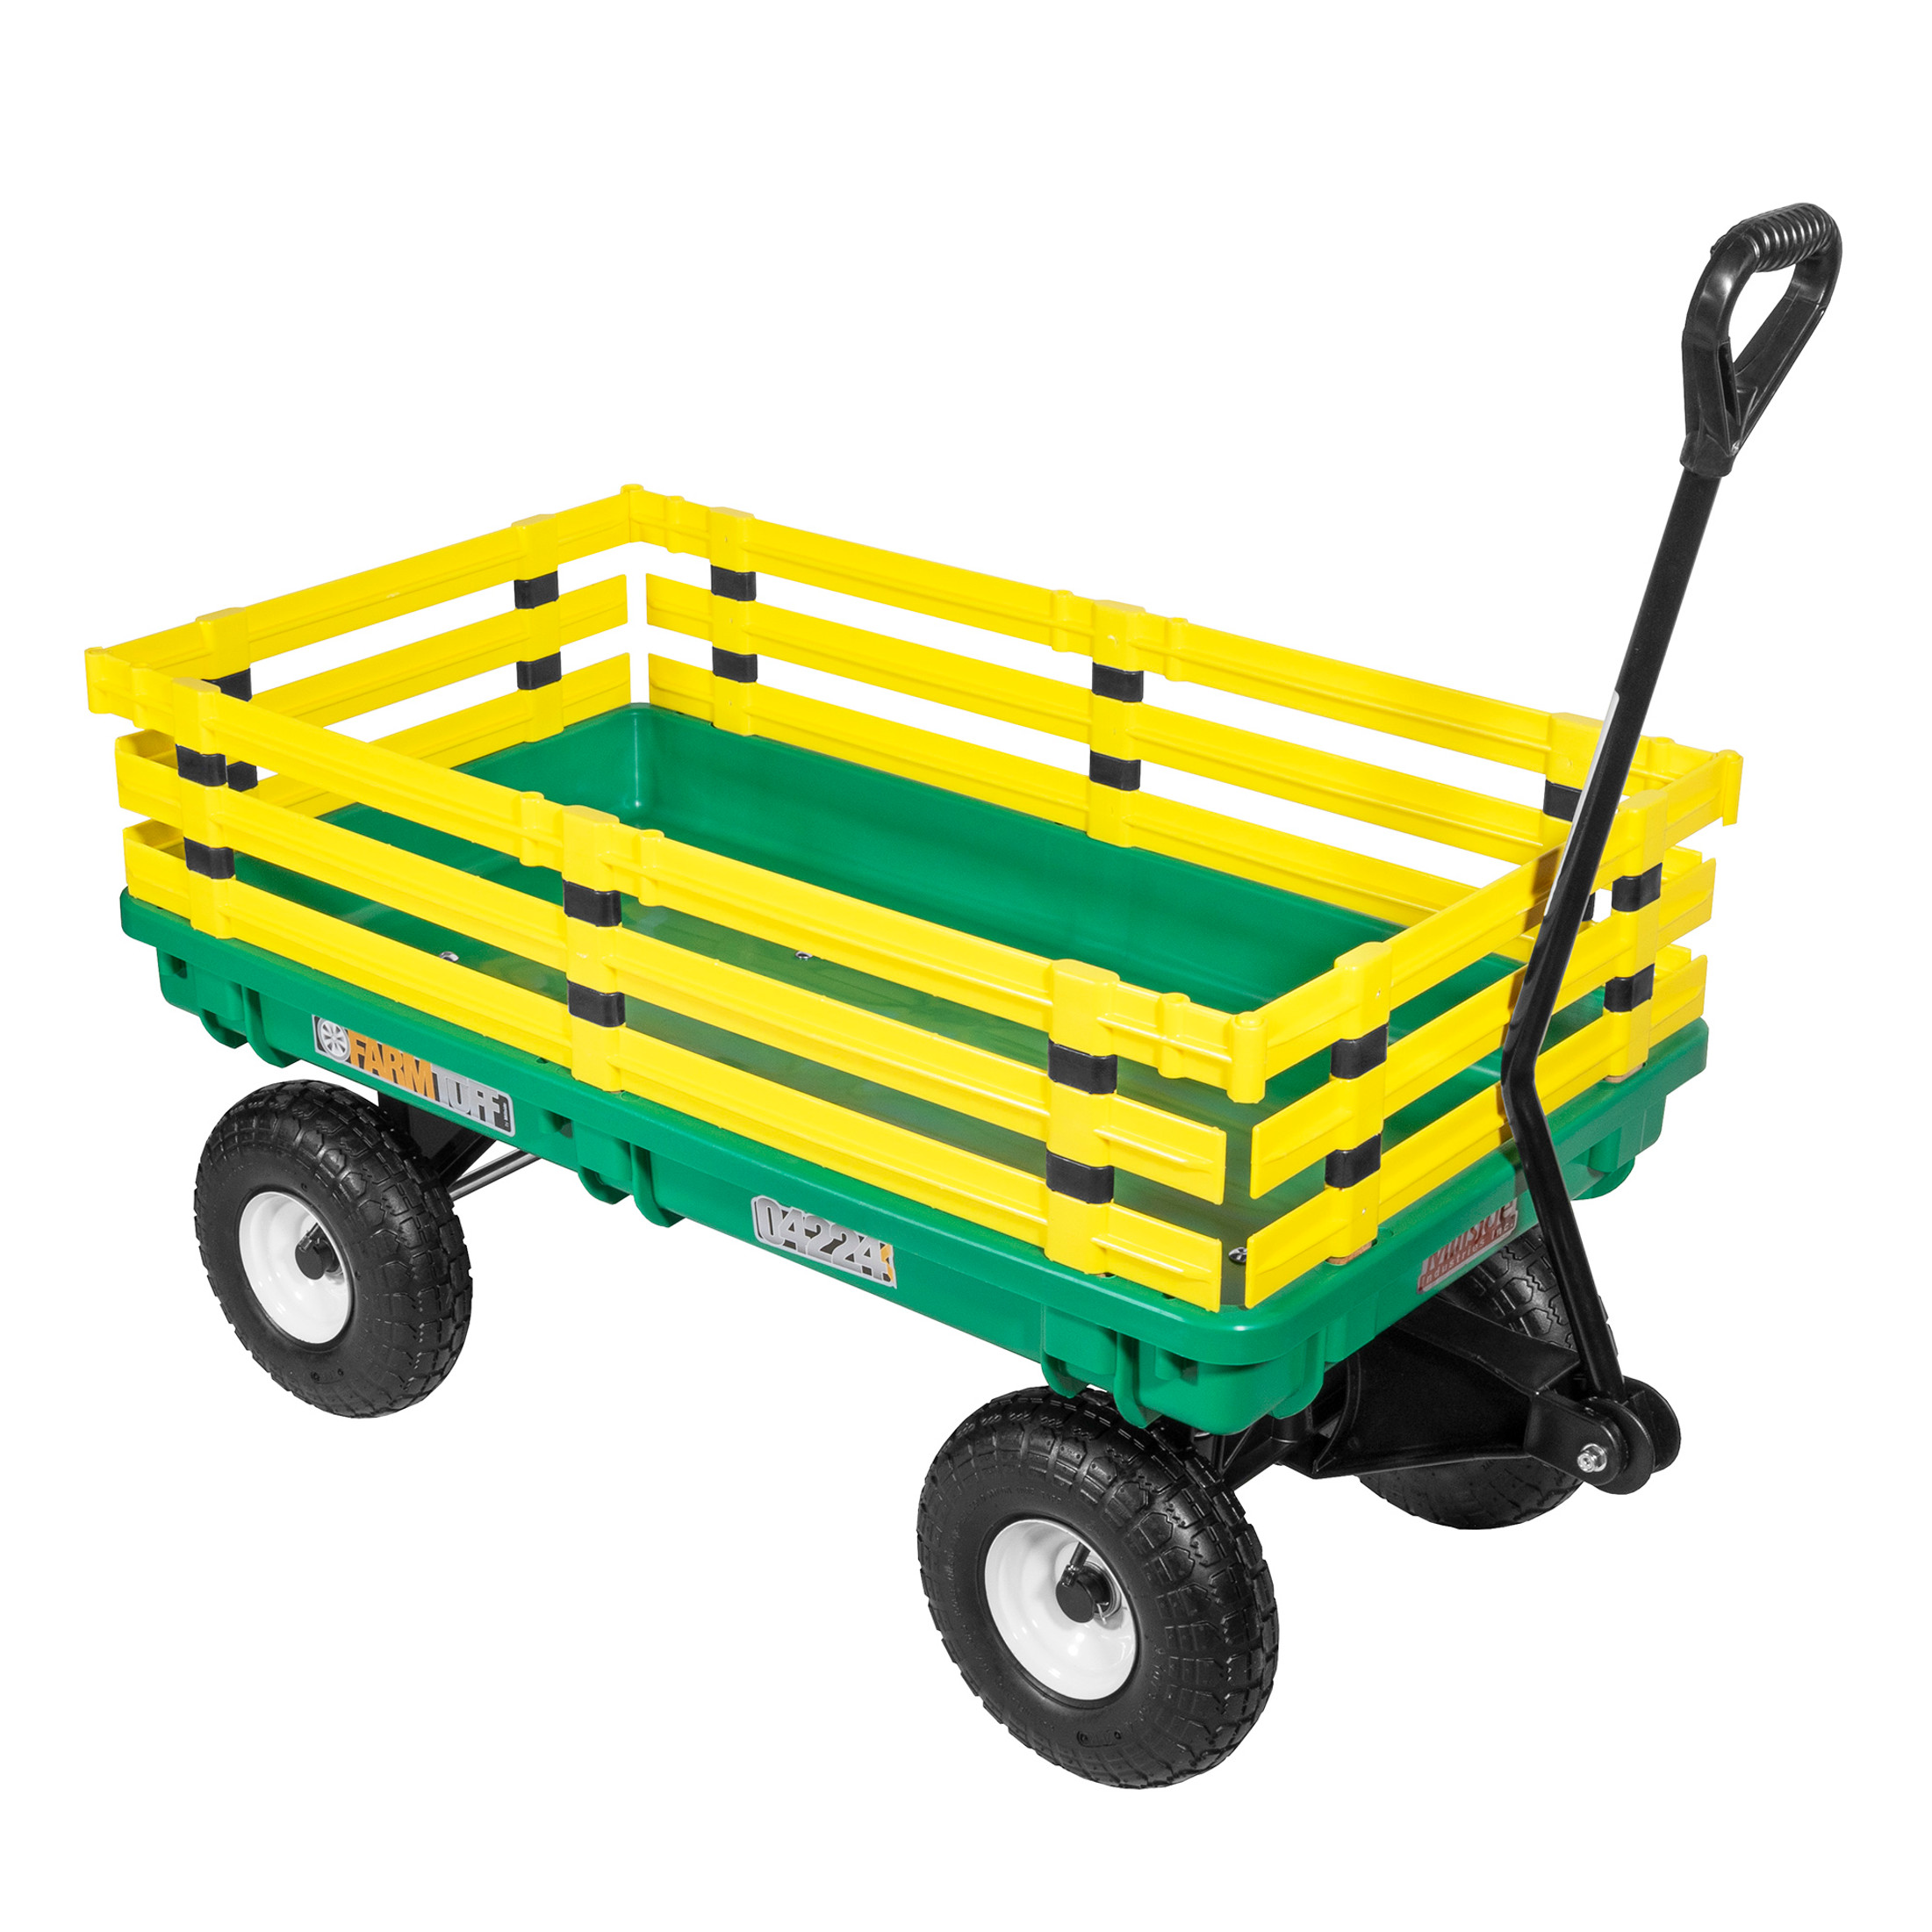 Farm Tuff Durable Plastic Garden Wagon Utility Cart with Removable Side Racks and Pneumatic Tires, Green and Yellow, 20" x 38"